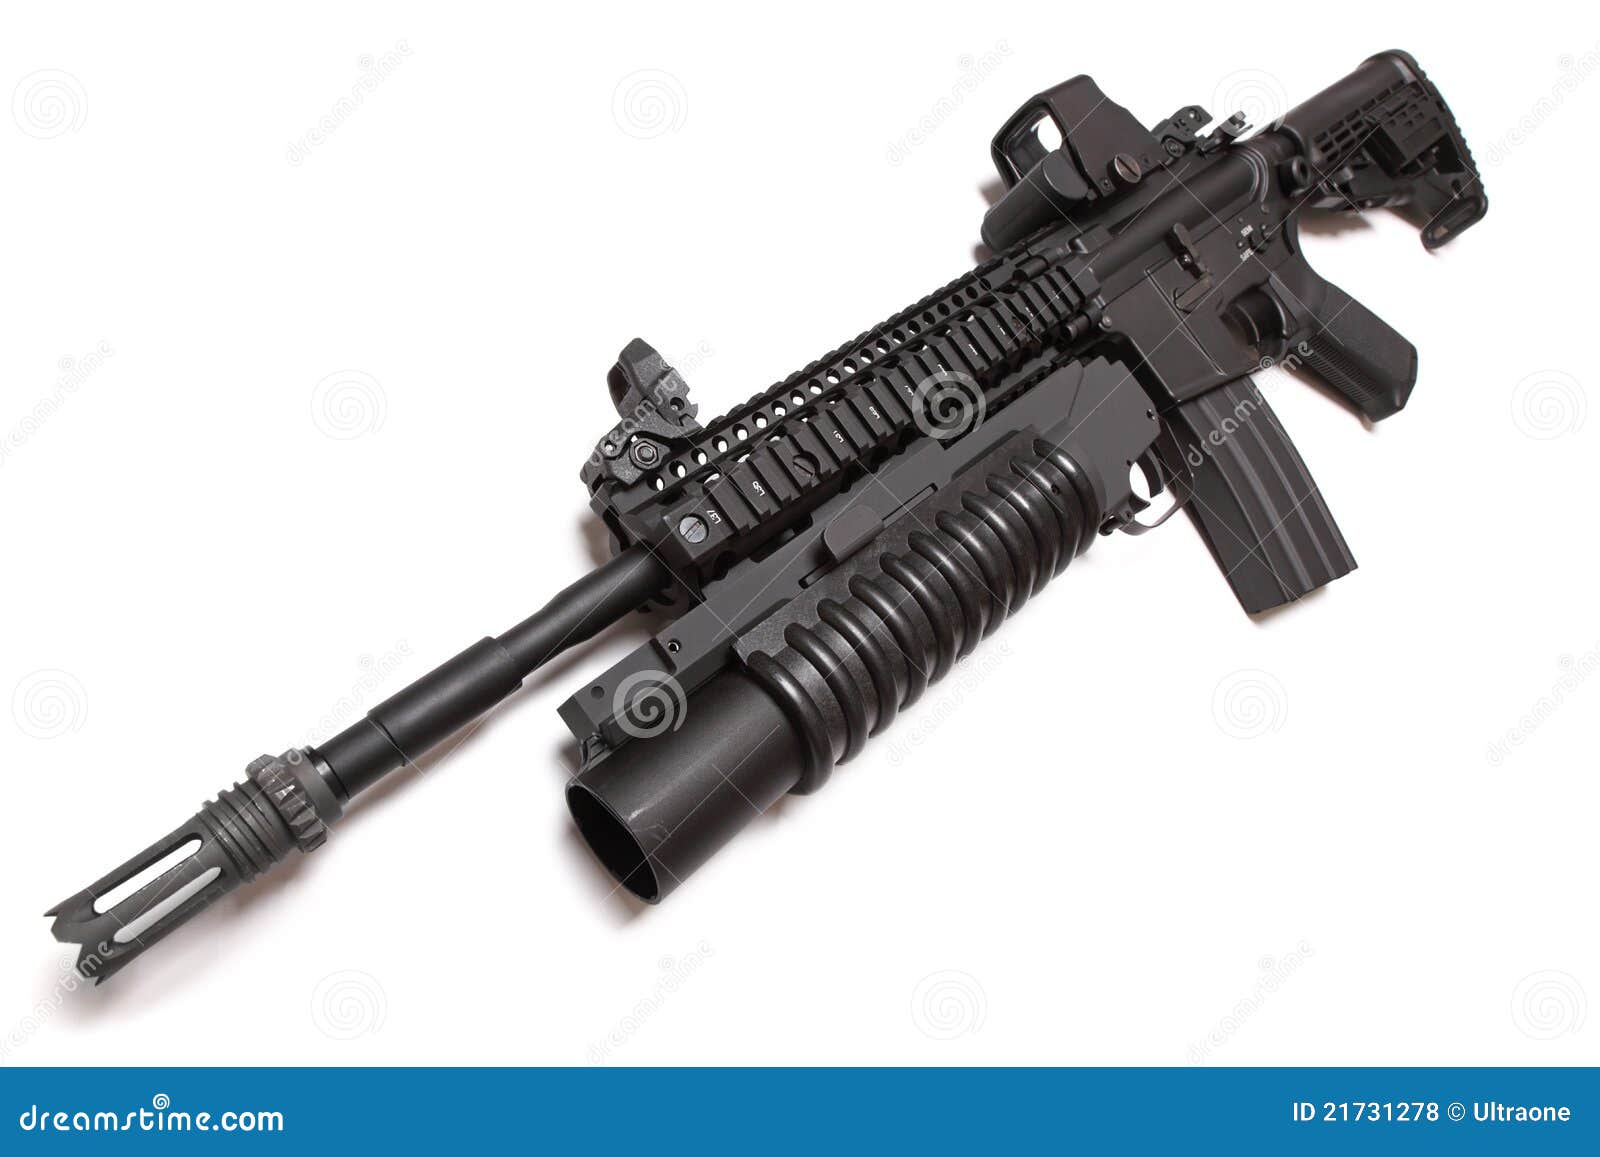 us army m4a1 tactical carbine with m203 louncher.